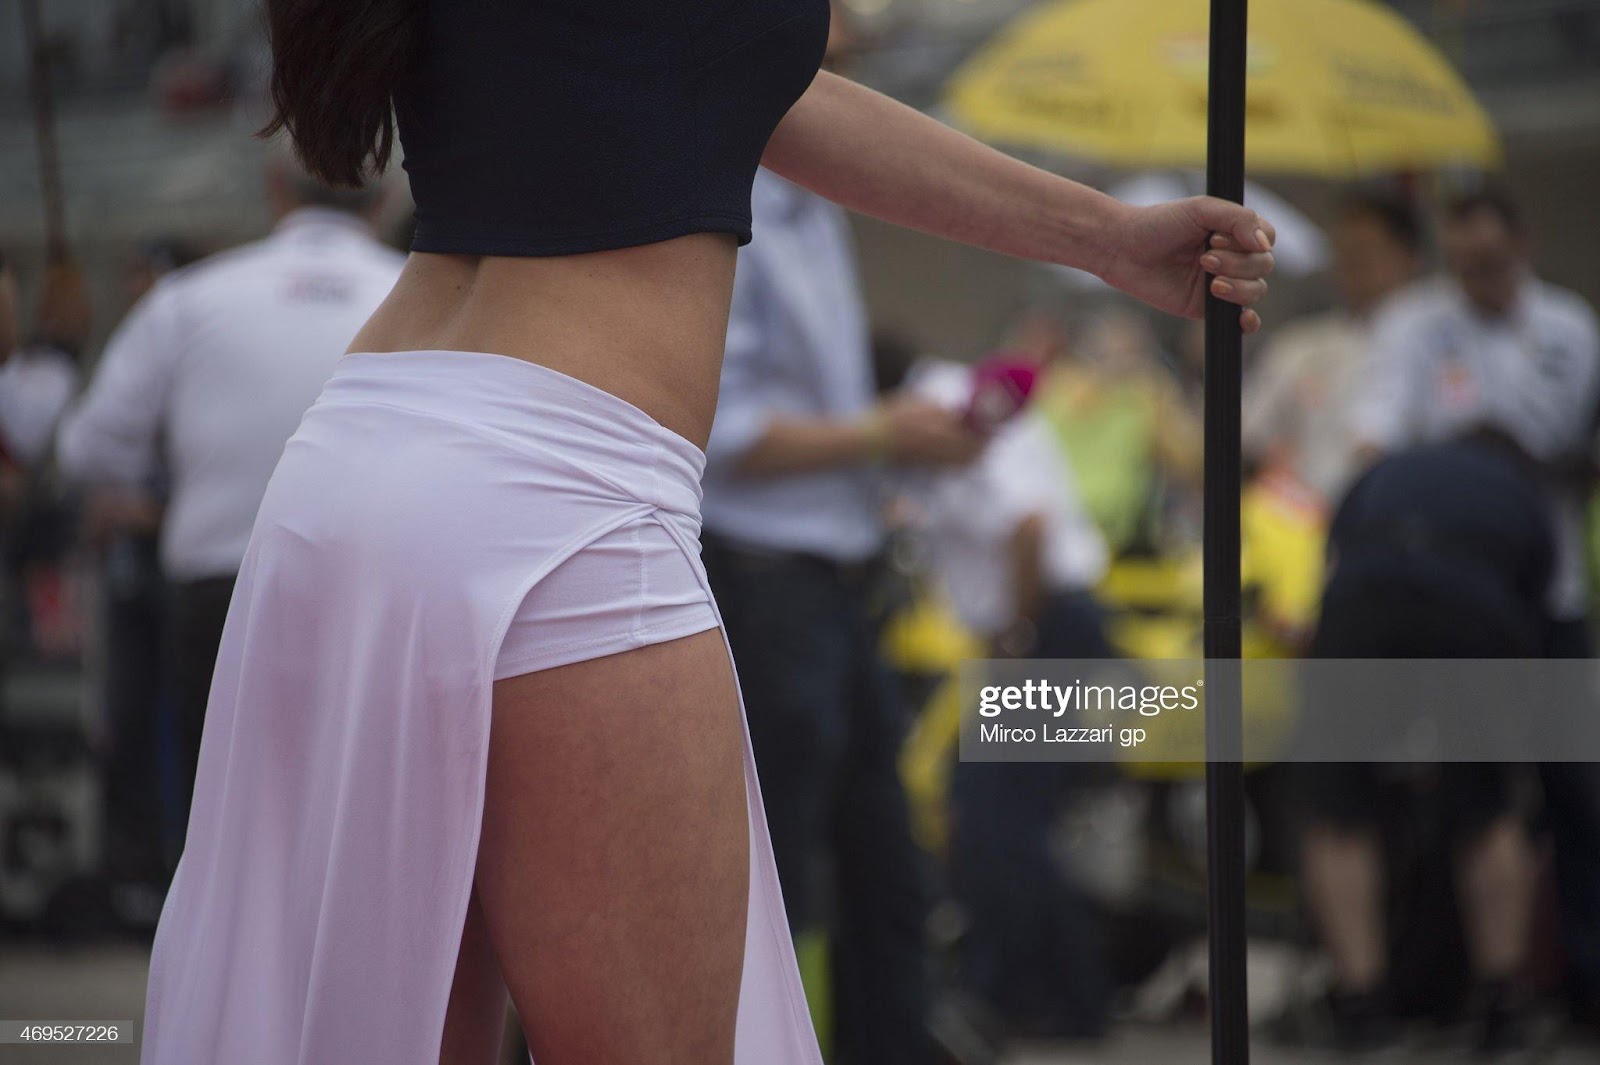 D:\Documenti\posts\posts\Women and motorsport\foto\Getty e altre\grid-girl-poses-on-the-grid-during-the-motogp-race-during-the-motogp-picture-id469527226.jpg